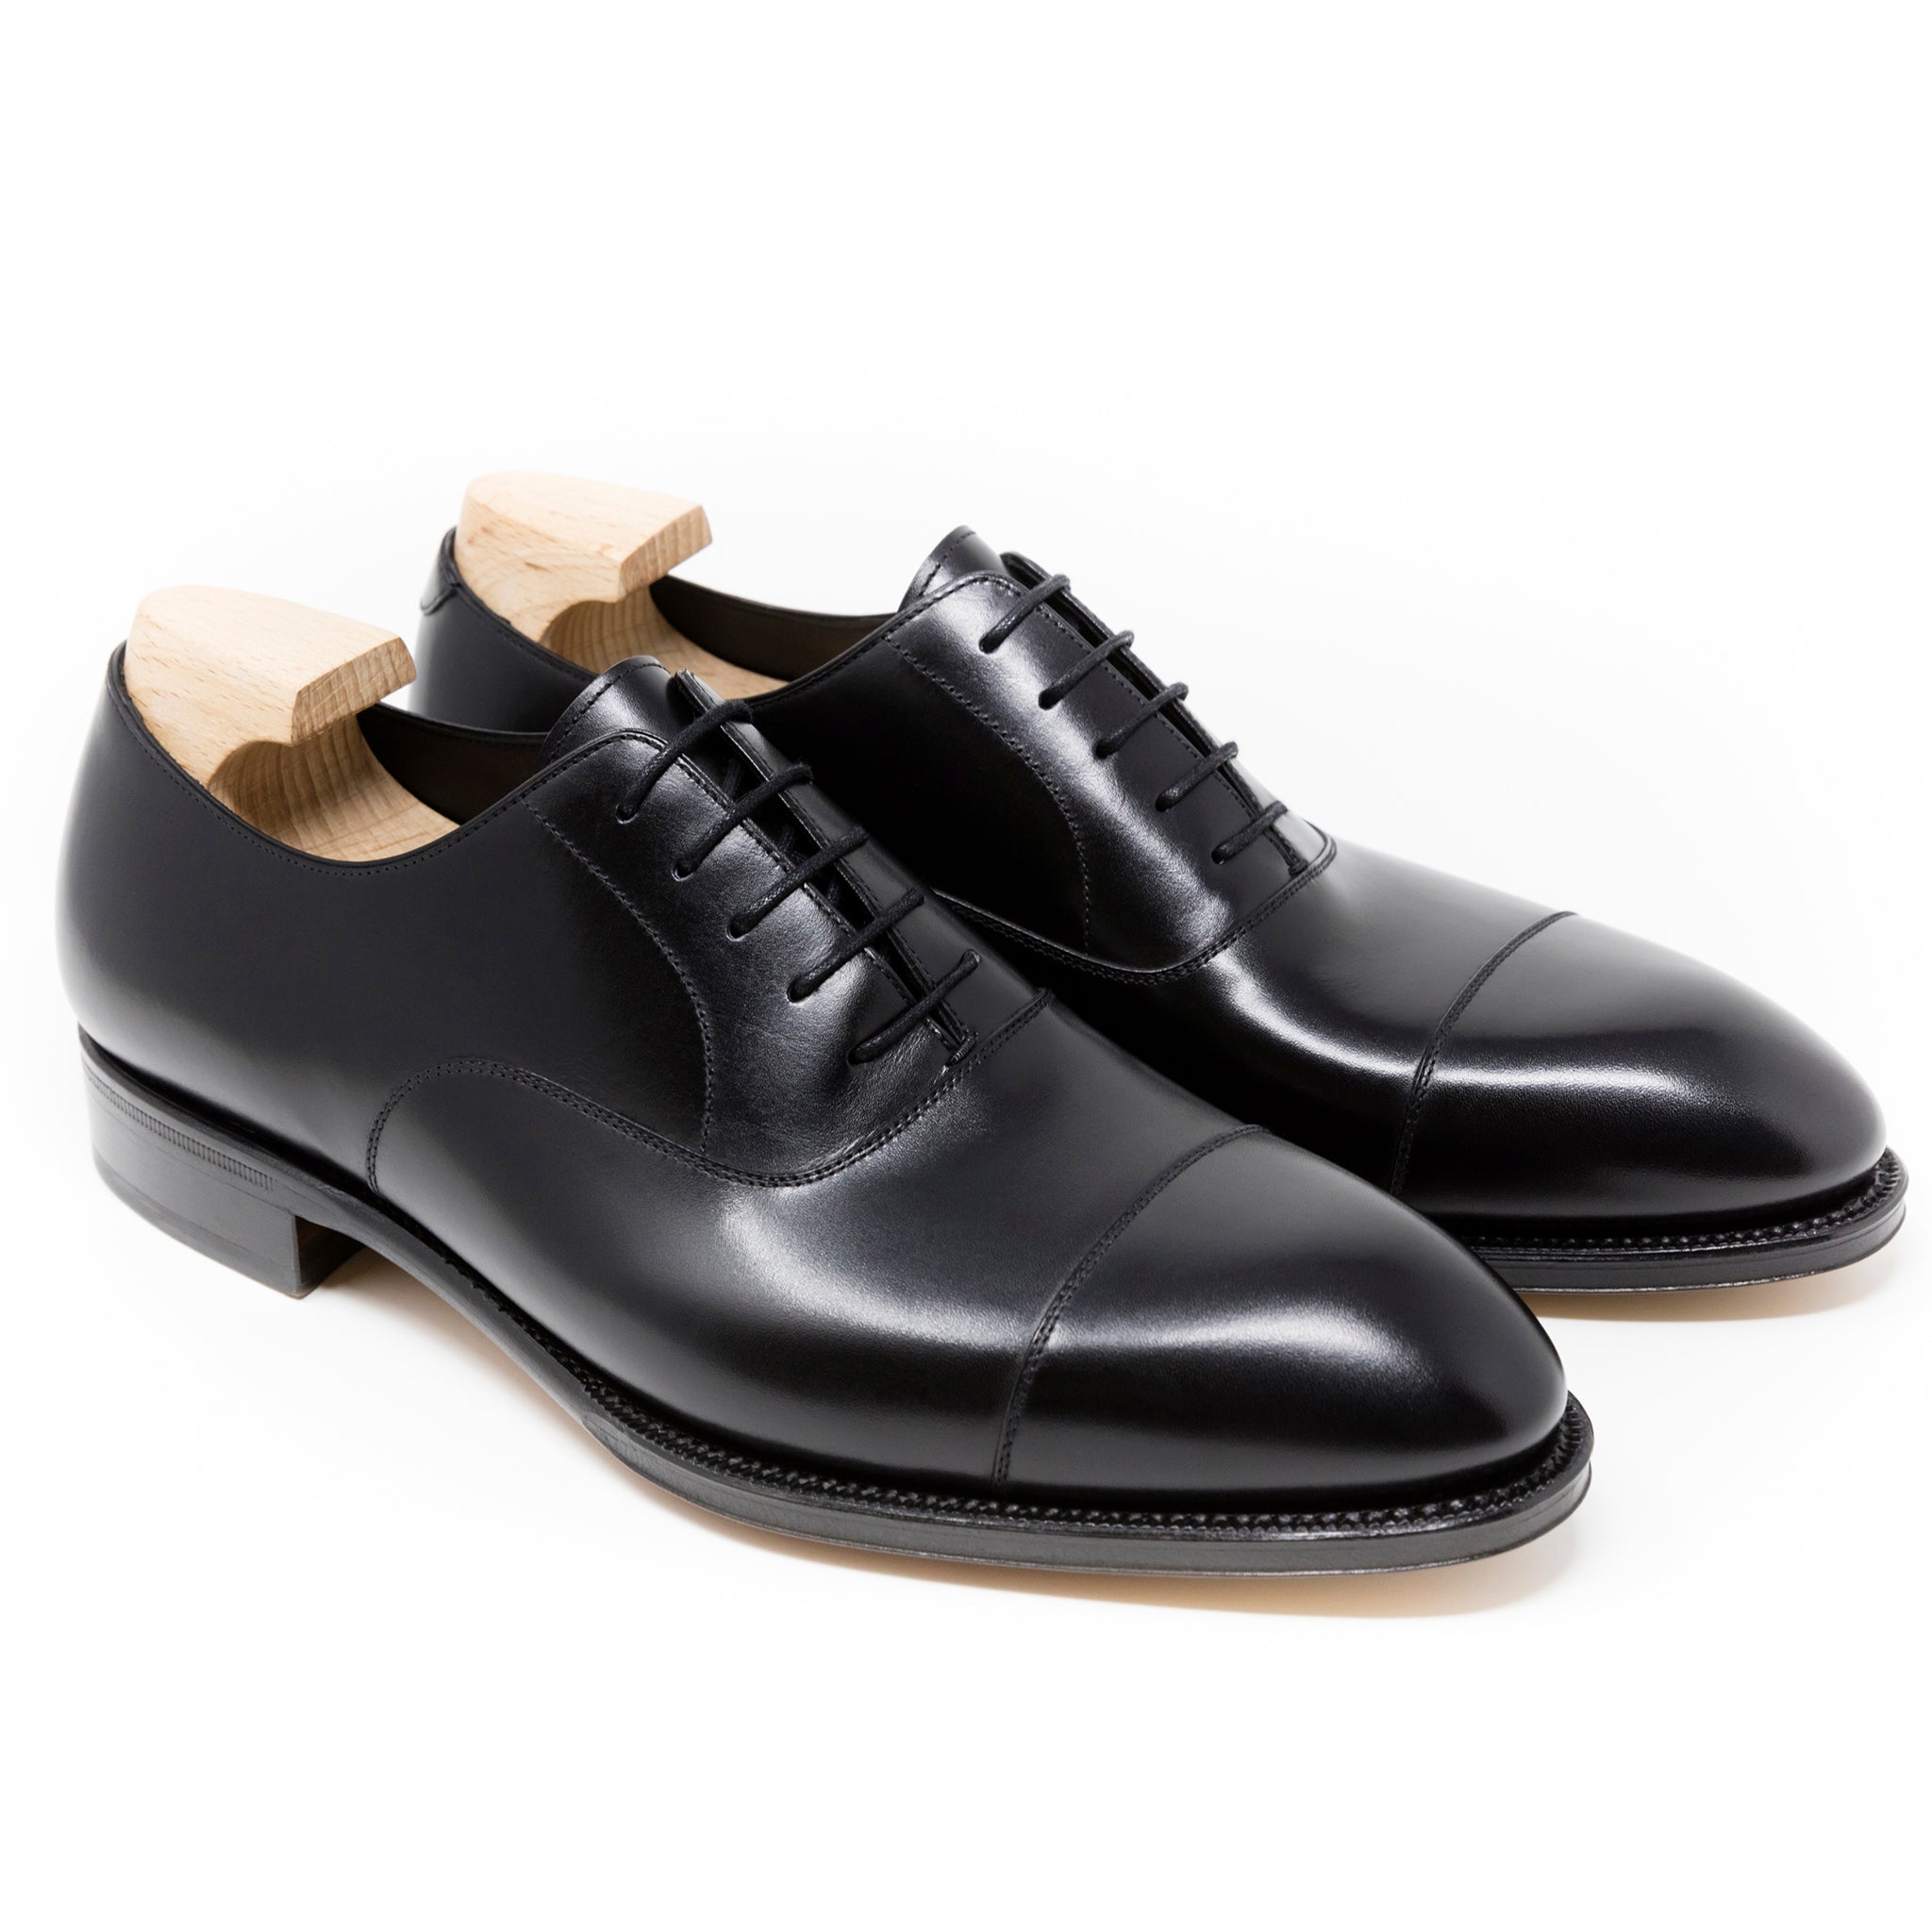 TLB Mallorca Oxford shoes | Men's Oxford shoes | Oliver model boxcalf ...